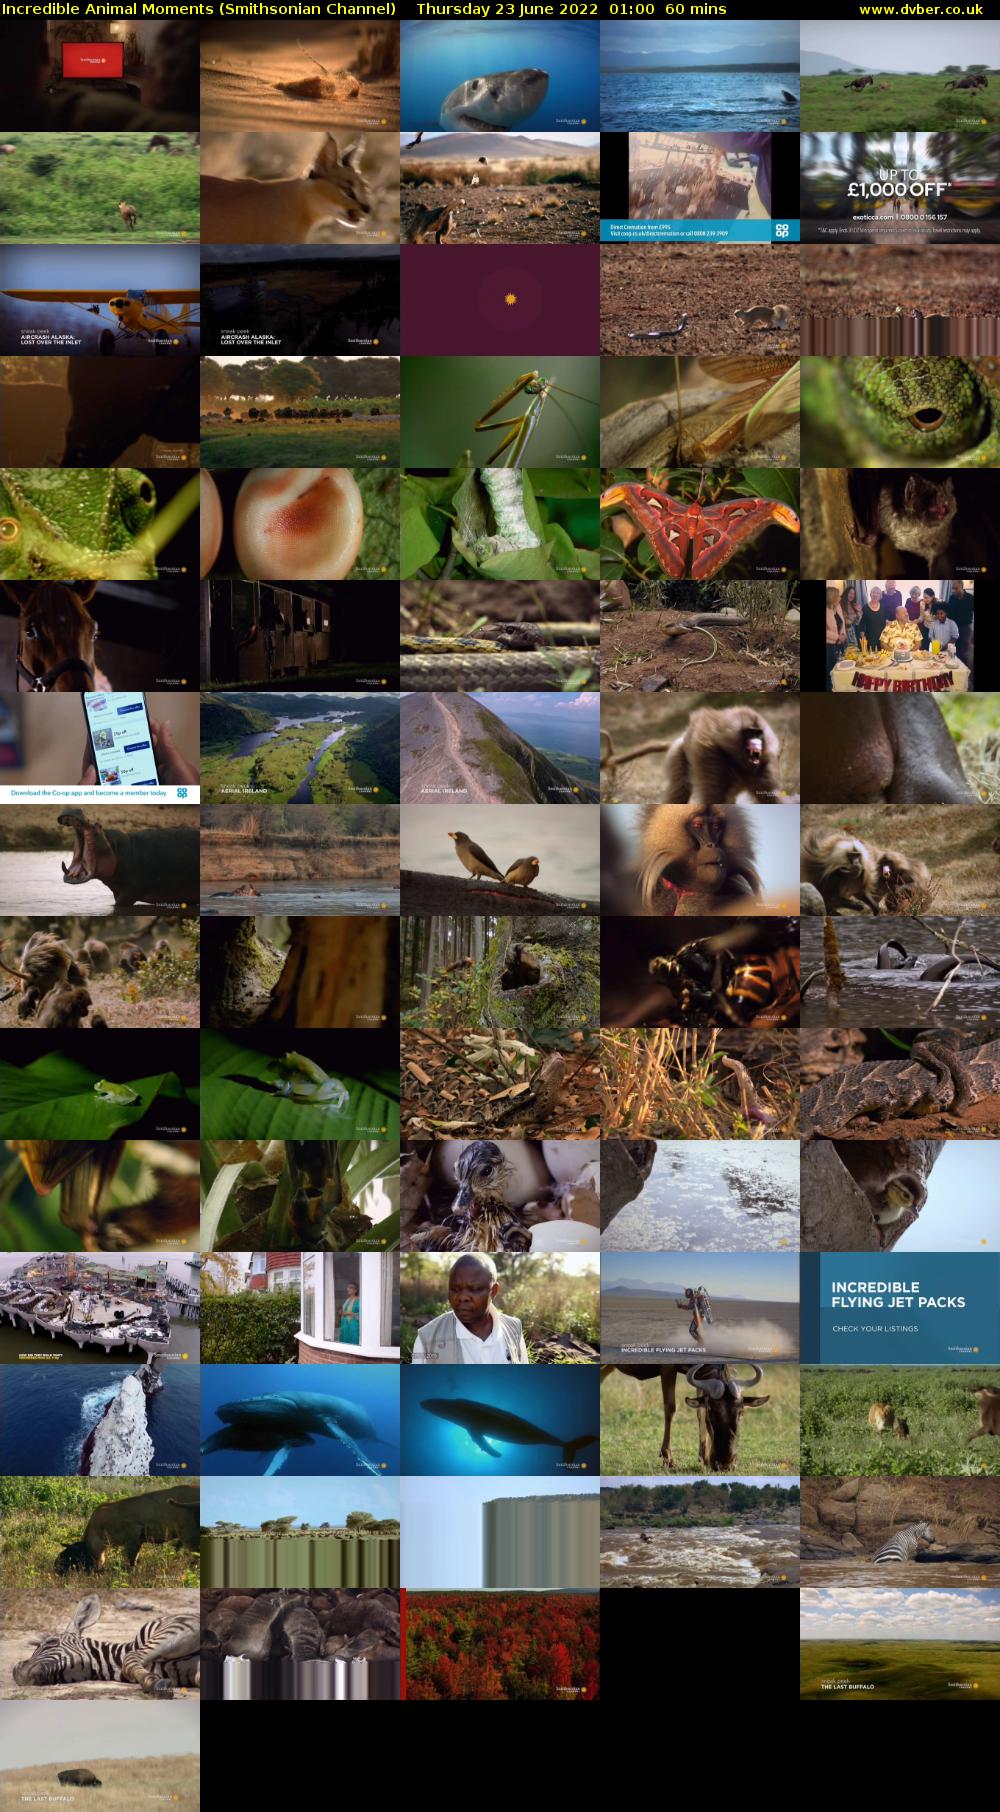 Incredible Animal Moments (Smithsonian Channel) Thursday 23 June 2022 01:00 - 02:00